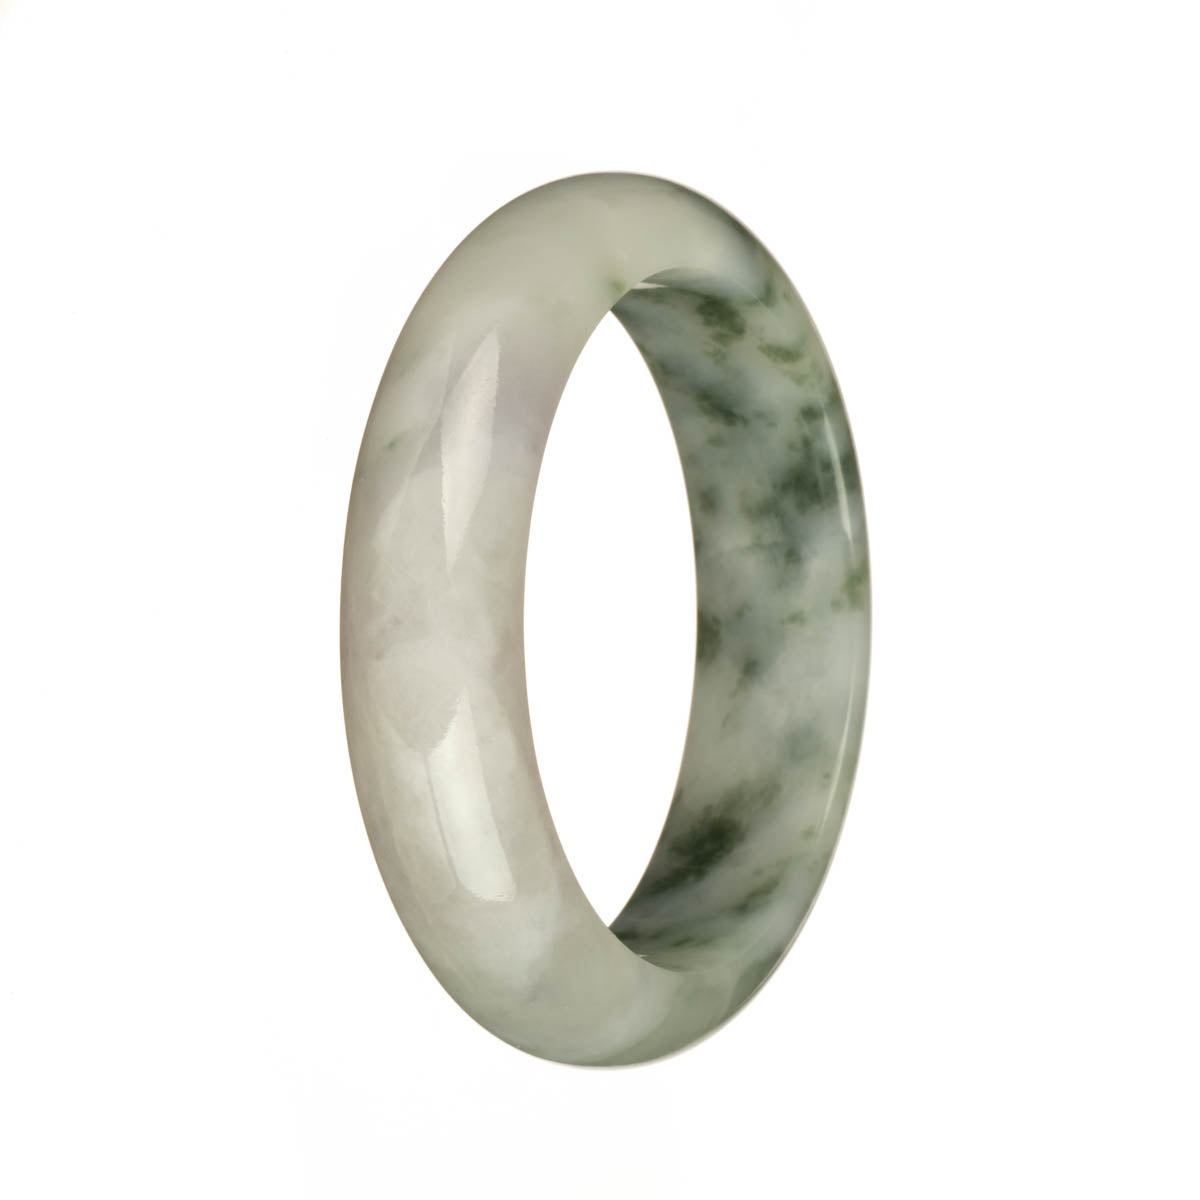 54mm White and Pale Lavender with Green Patterns Jade Bangle Bracelet